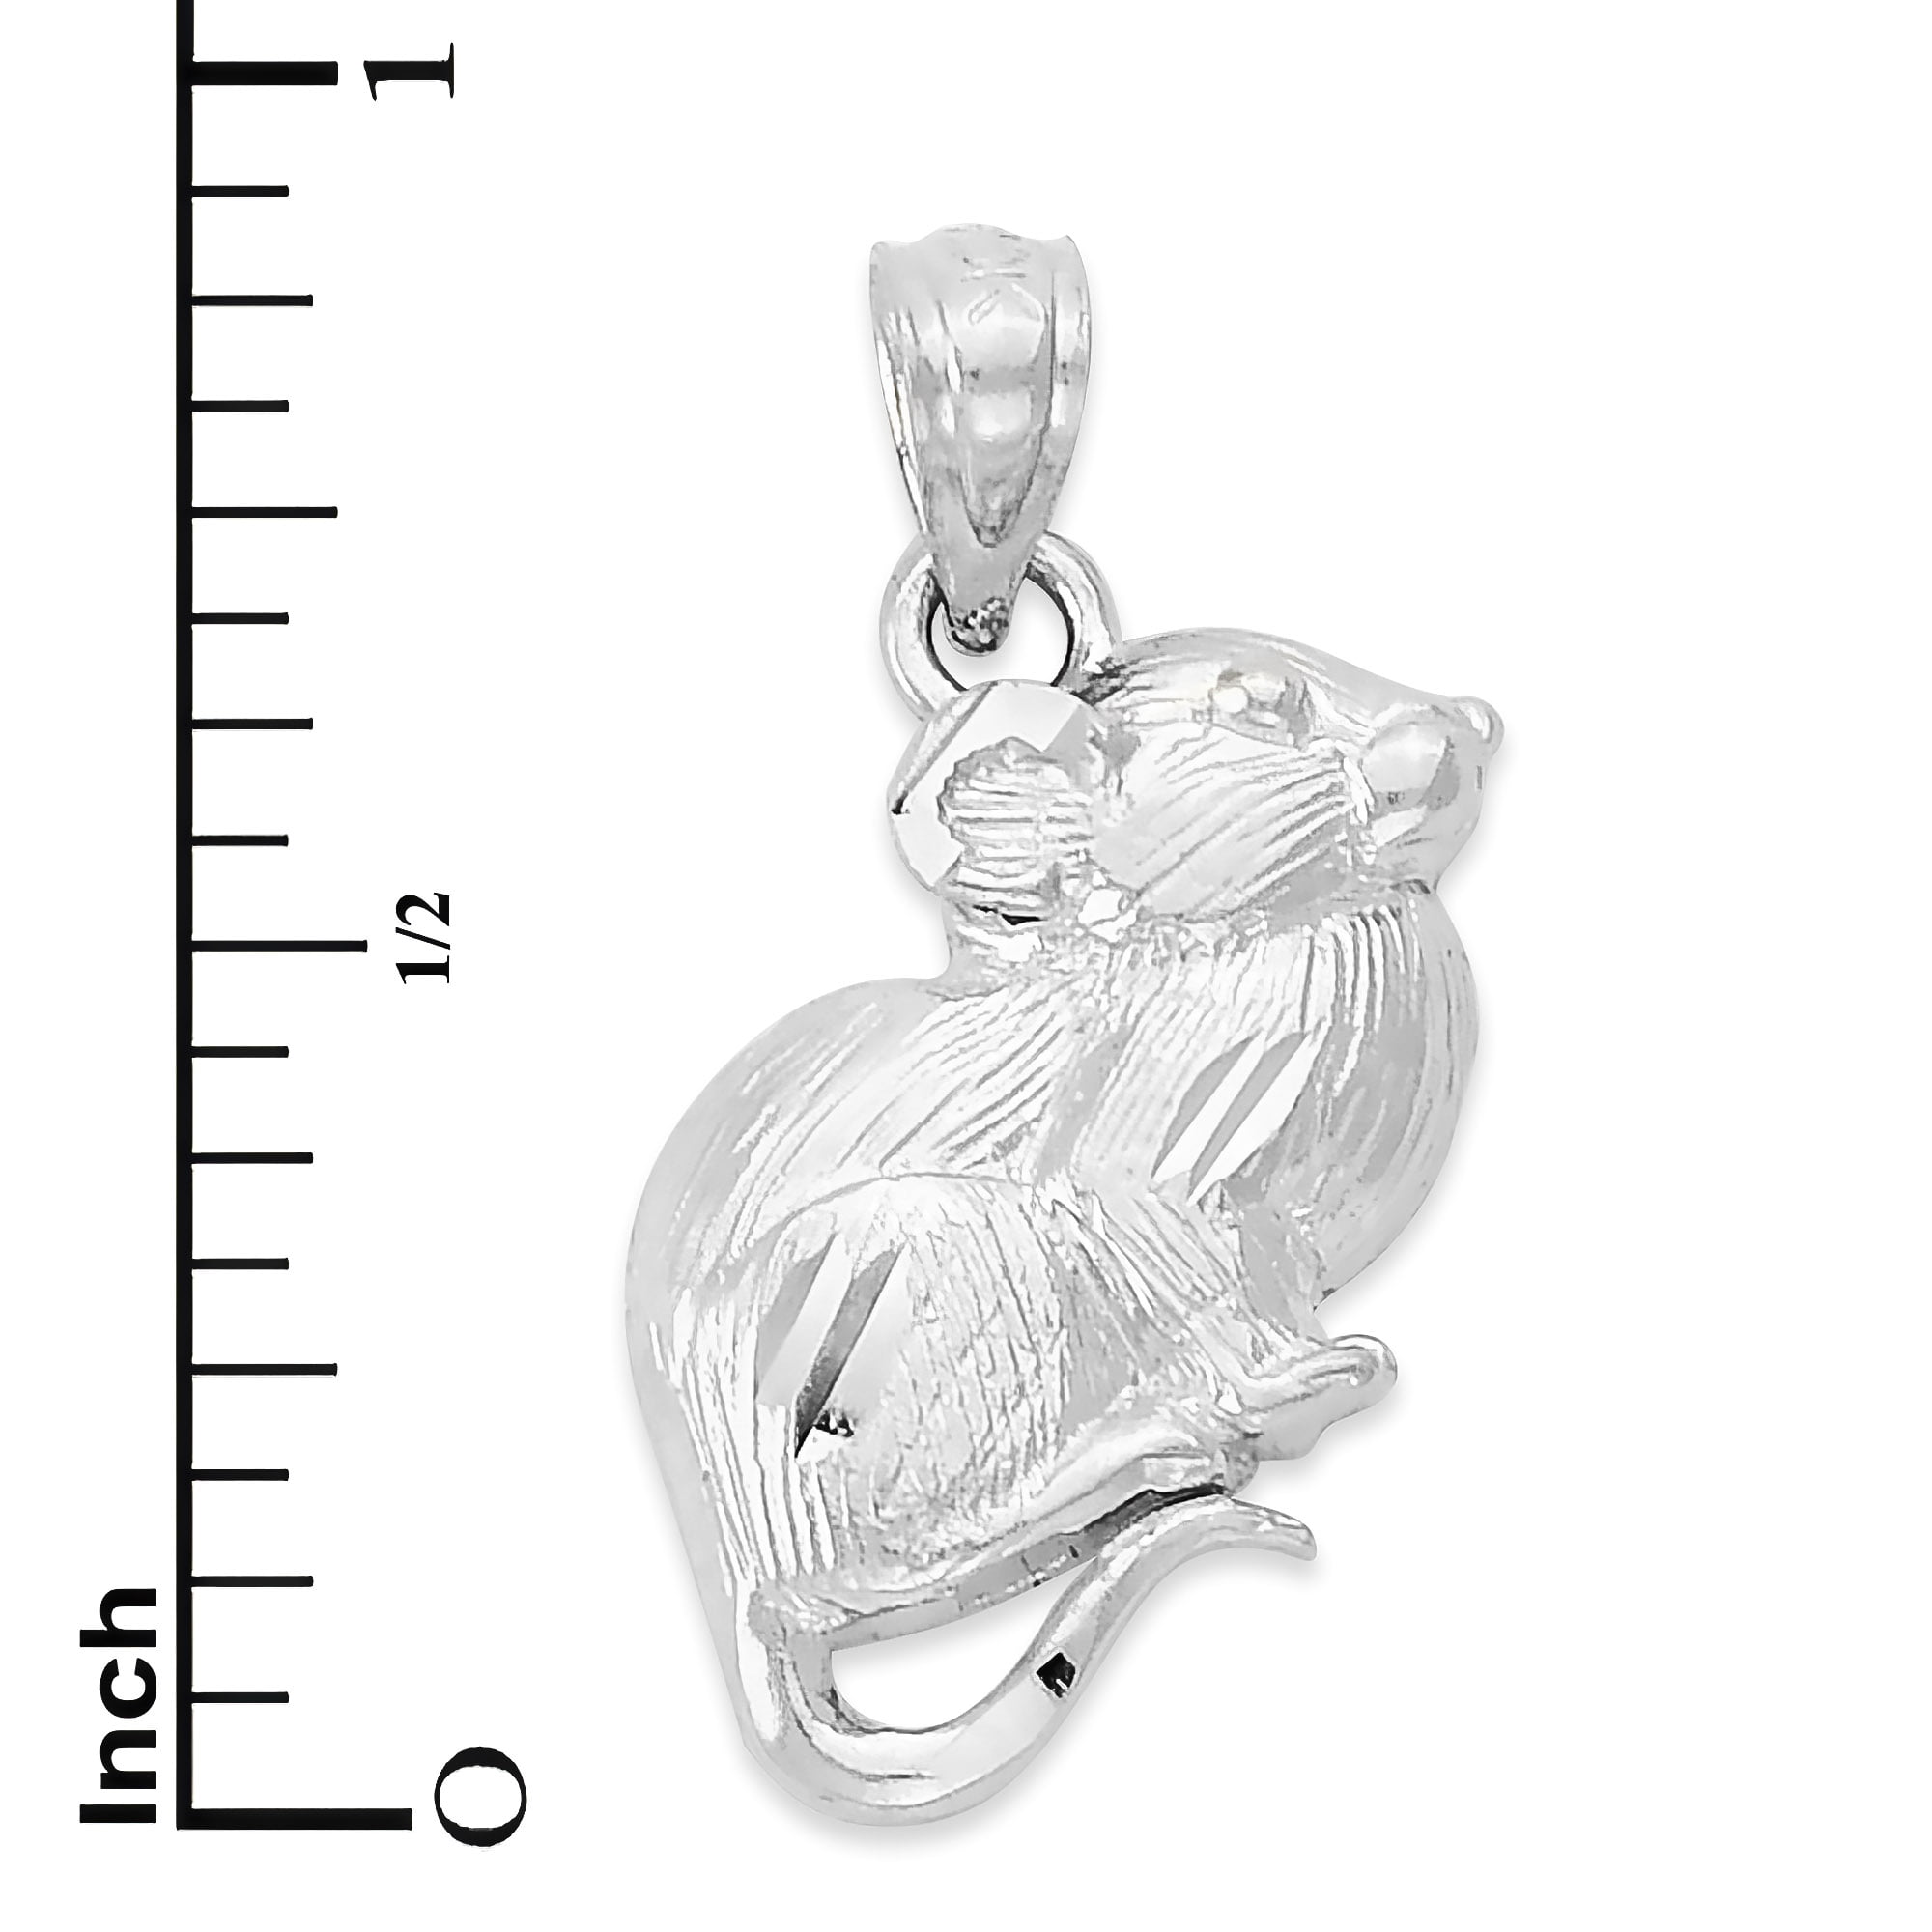 Chinese Zodiac Ox Charm Sterling Silver .925 Symbol Astrology Year Sign 